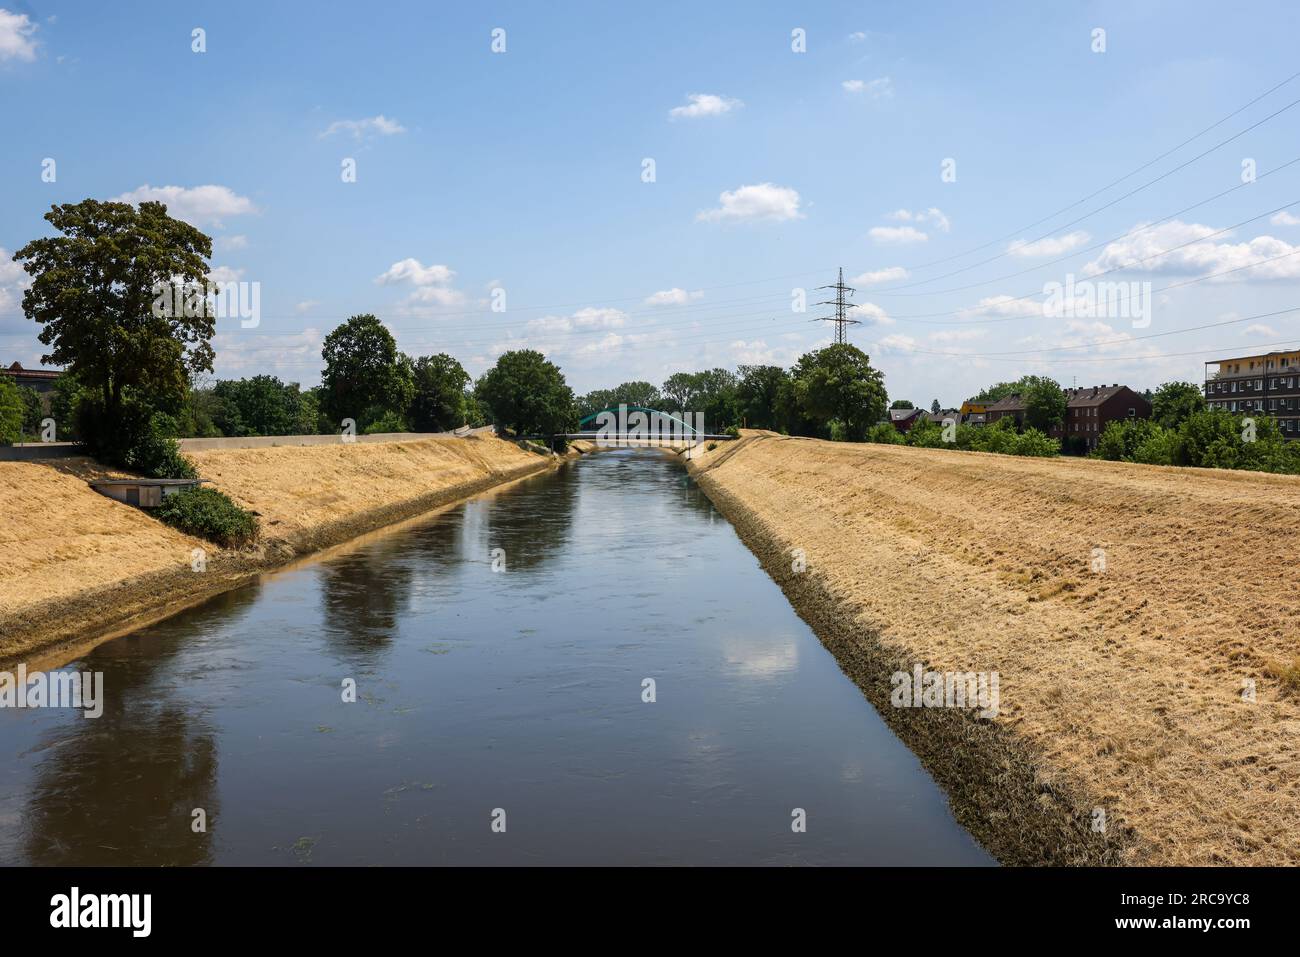 Oberhausen, North Rhine-Westphalia, Germany - Renaturalization of the Emscher in the Holtener Bruch. The currently straightened Emscher, shown here at Stock Photo